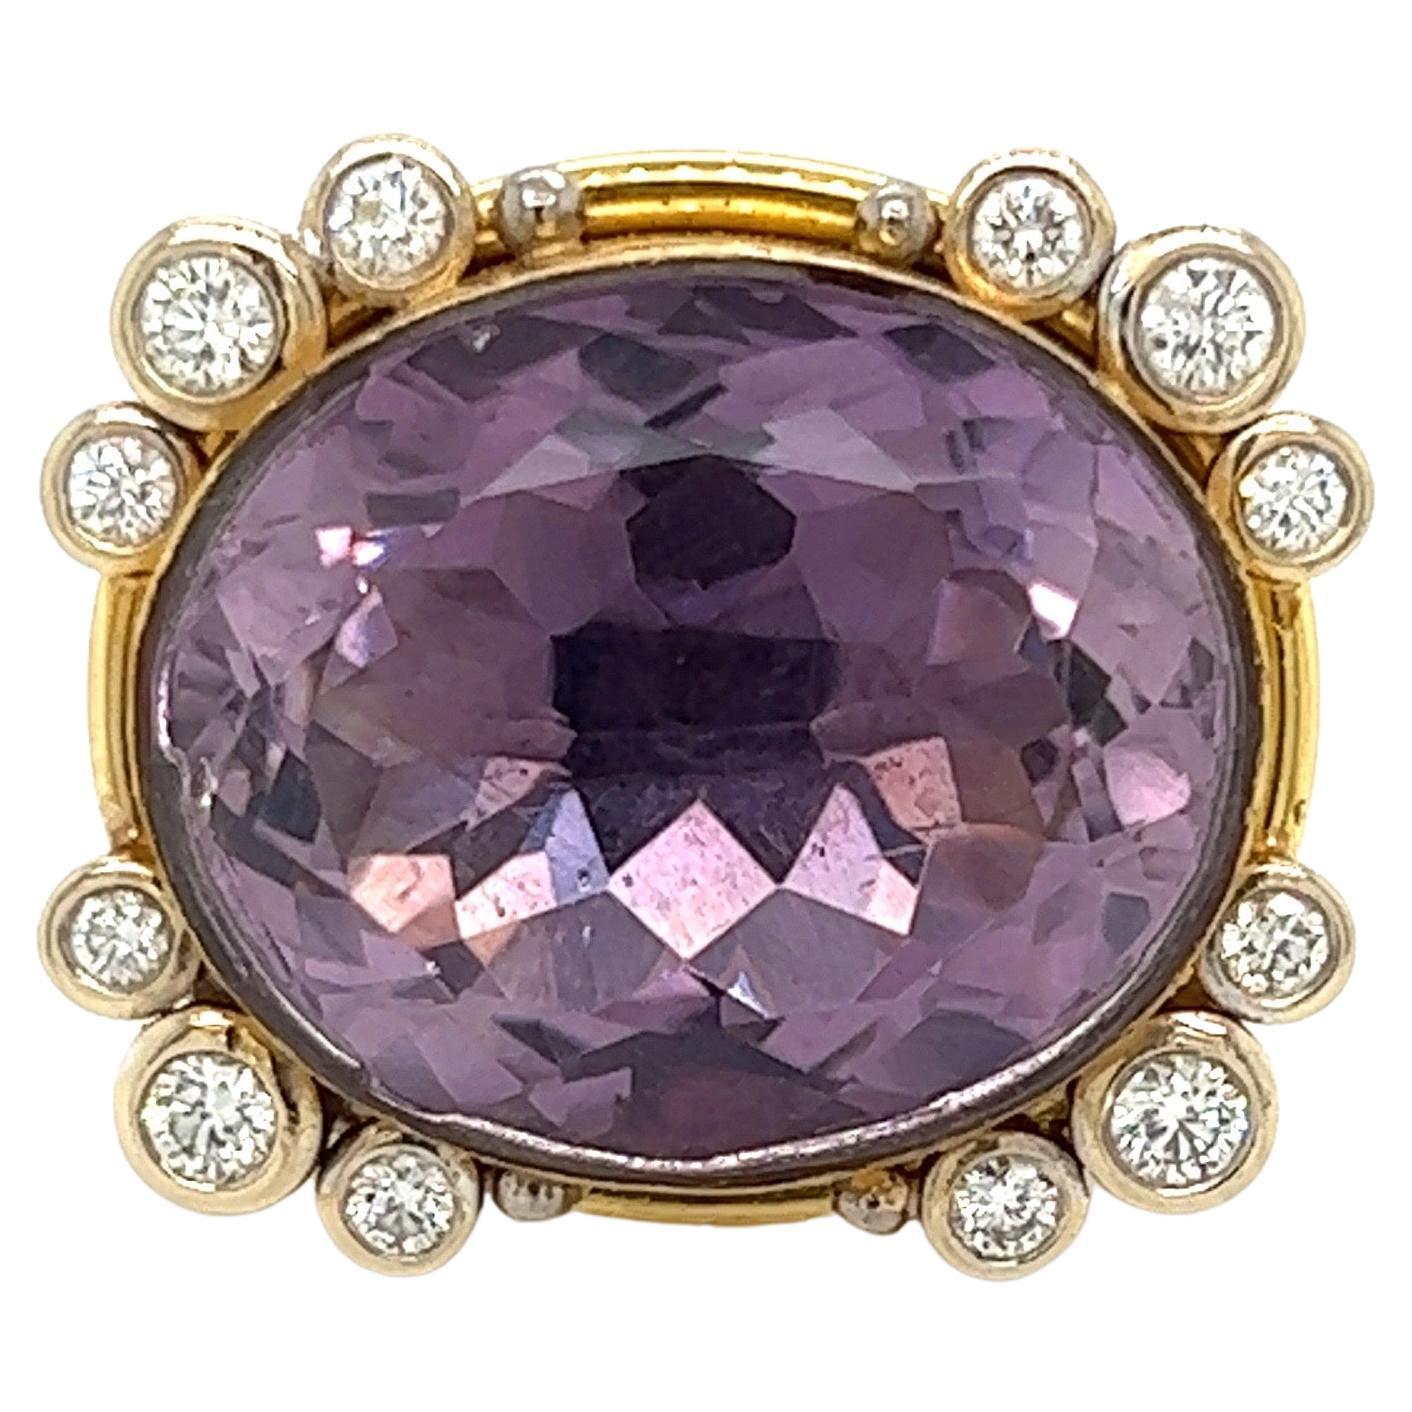 This exquisite custom made, one of a kind estate ring features a large, approximately 20 carat, oval amethyst. The amethyst is surrounded by 18 round diamonds totaling approximately 1.00 ctw, The diamonds are VS2 in clarity and H-I in color. 